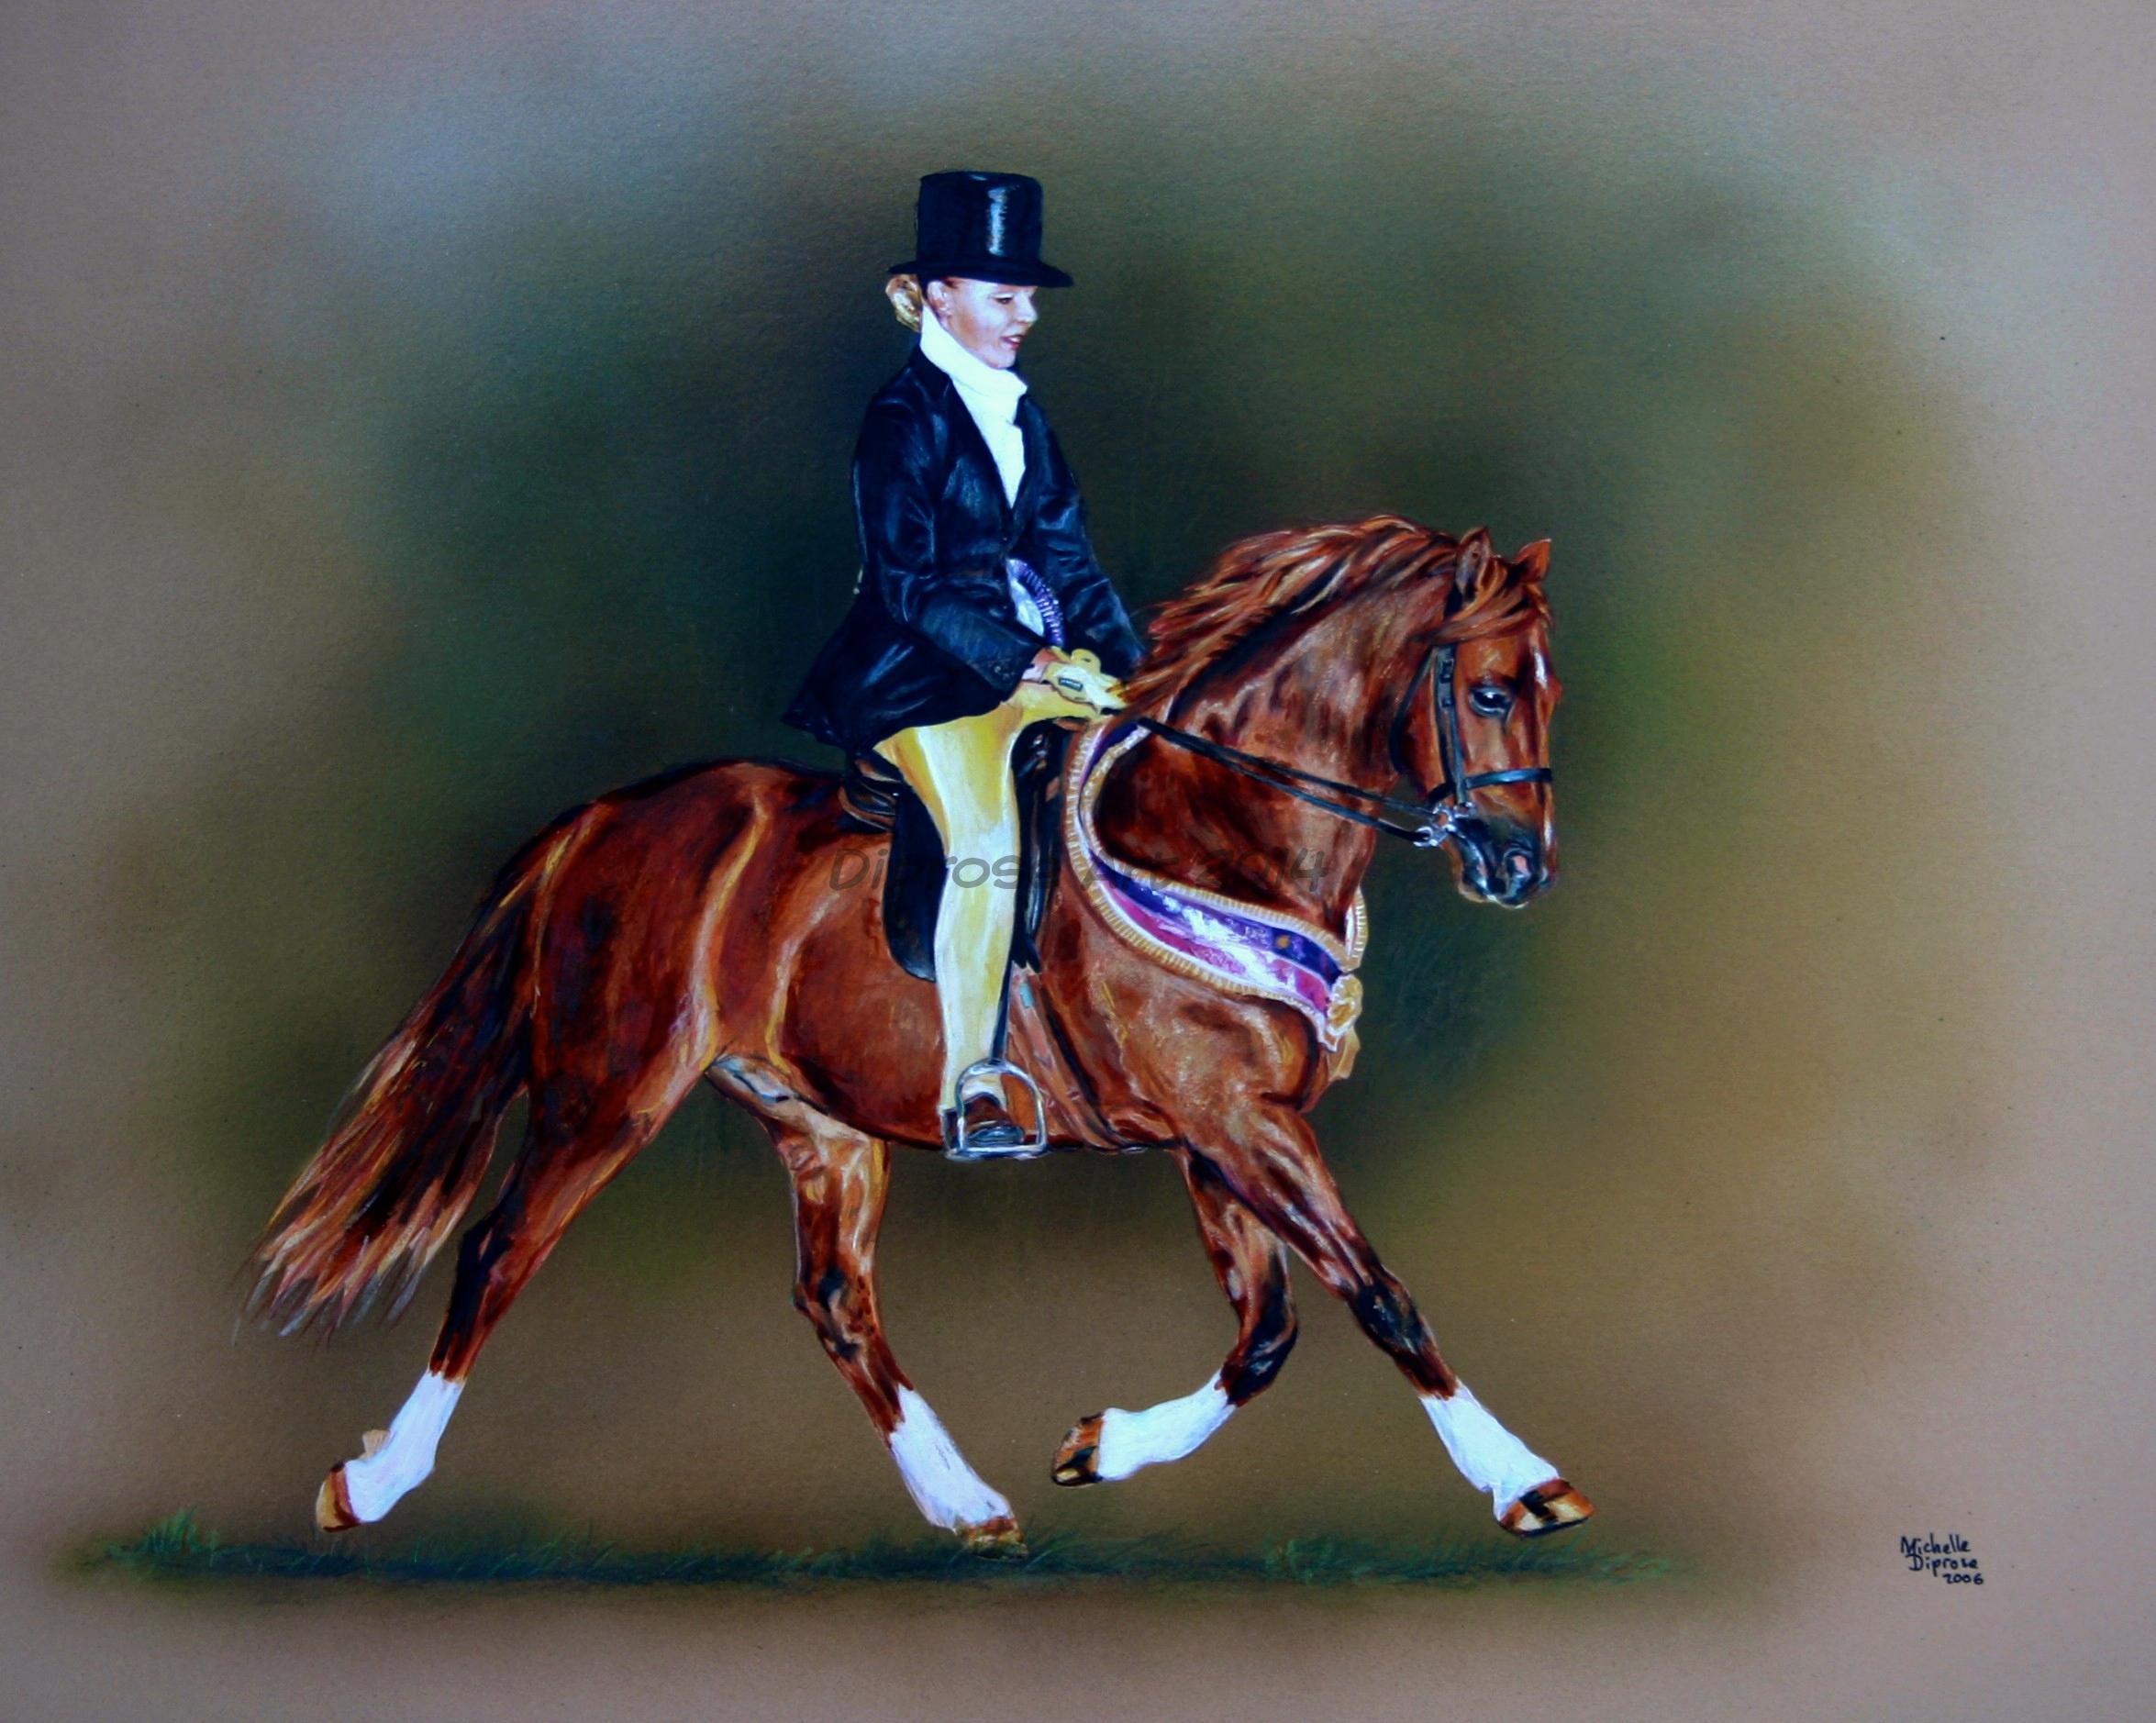 Acrylics on board - approx A3 - horse and rider portrait - what a smart couple - a painting can be a very special way to commemorate the highlight moment of such a wonderful partnership.